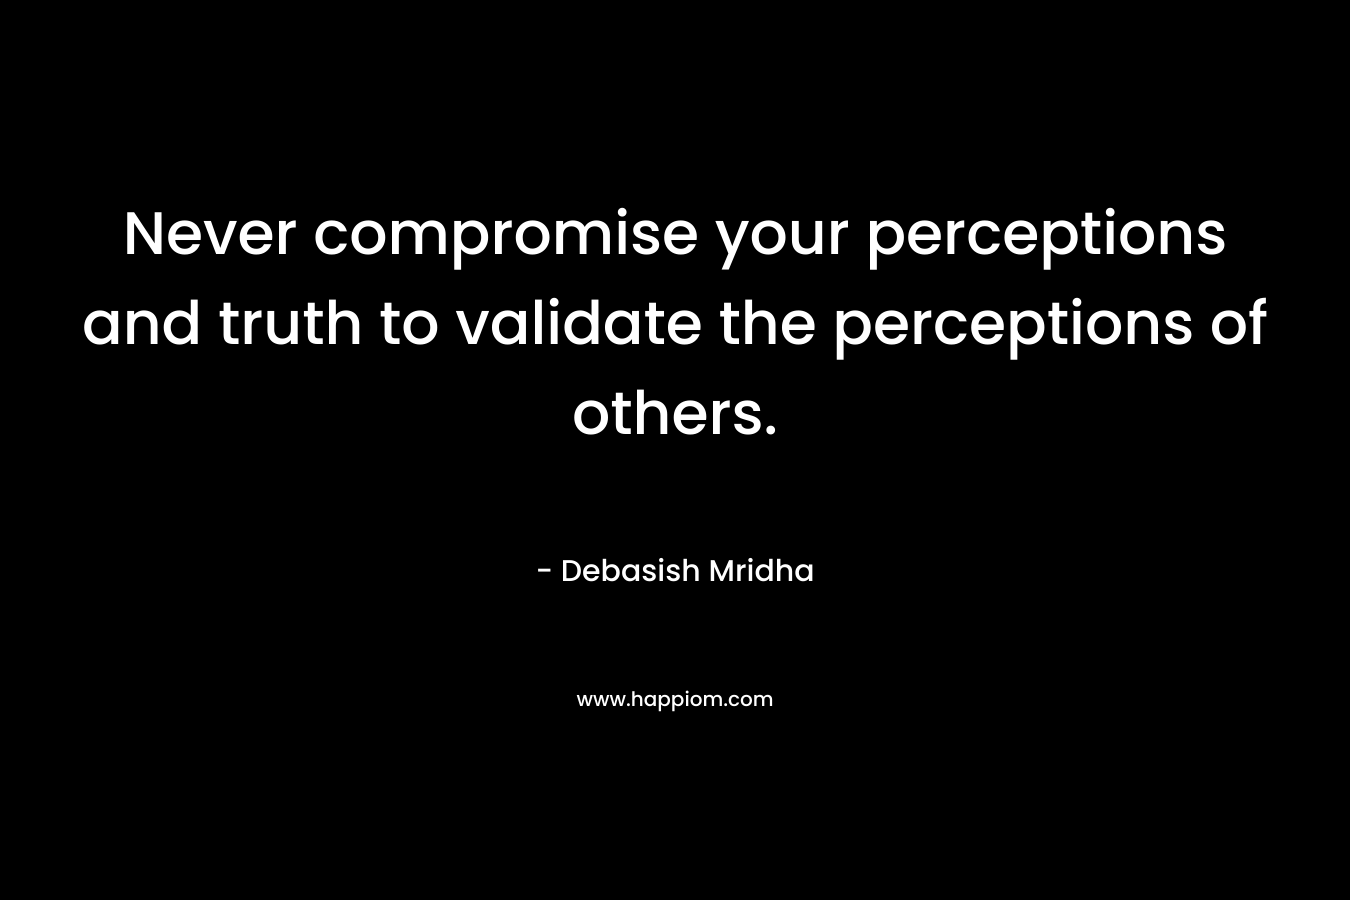 Never compromise your perceptions and truth to validate the perceptions of others.